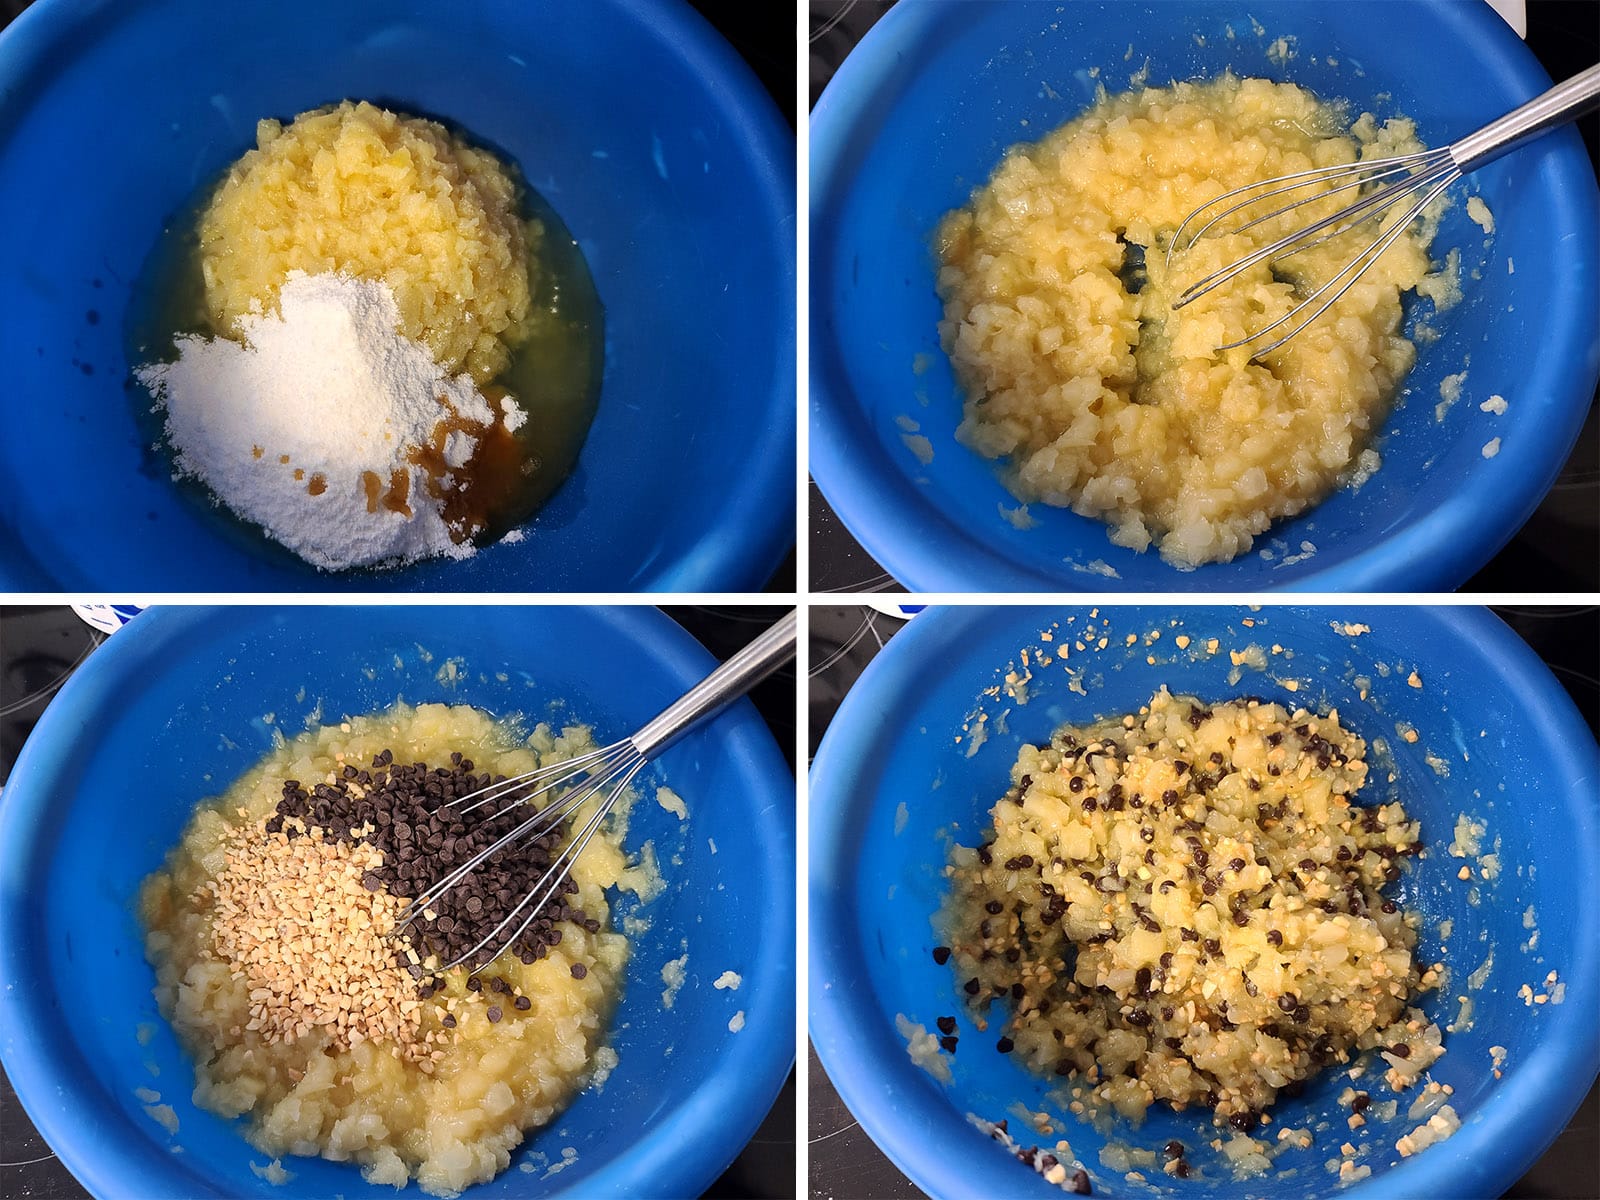 A 4 part image showing the pudding, vanilla, crushed pineapple, chocolate chips, and peanuts being mixed together in stages.